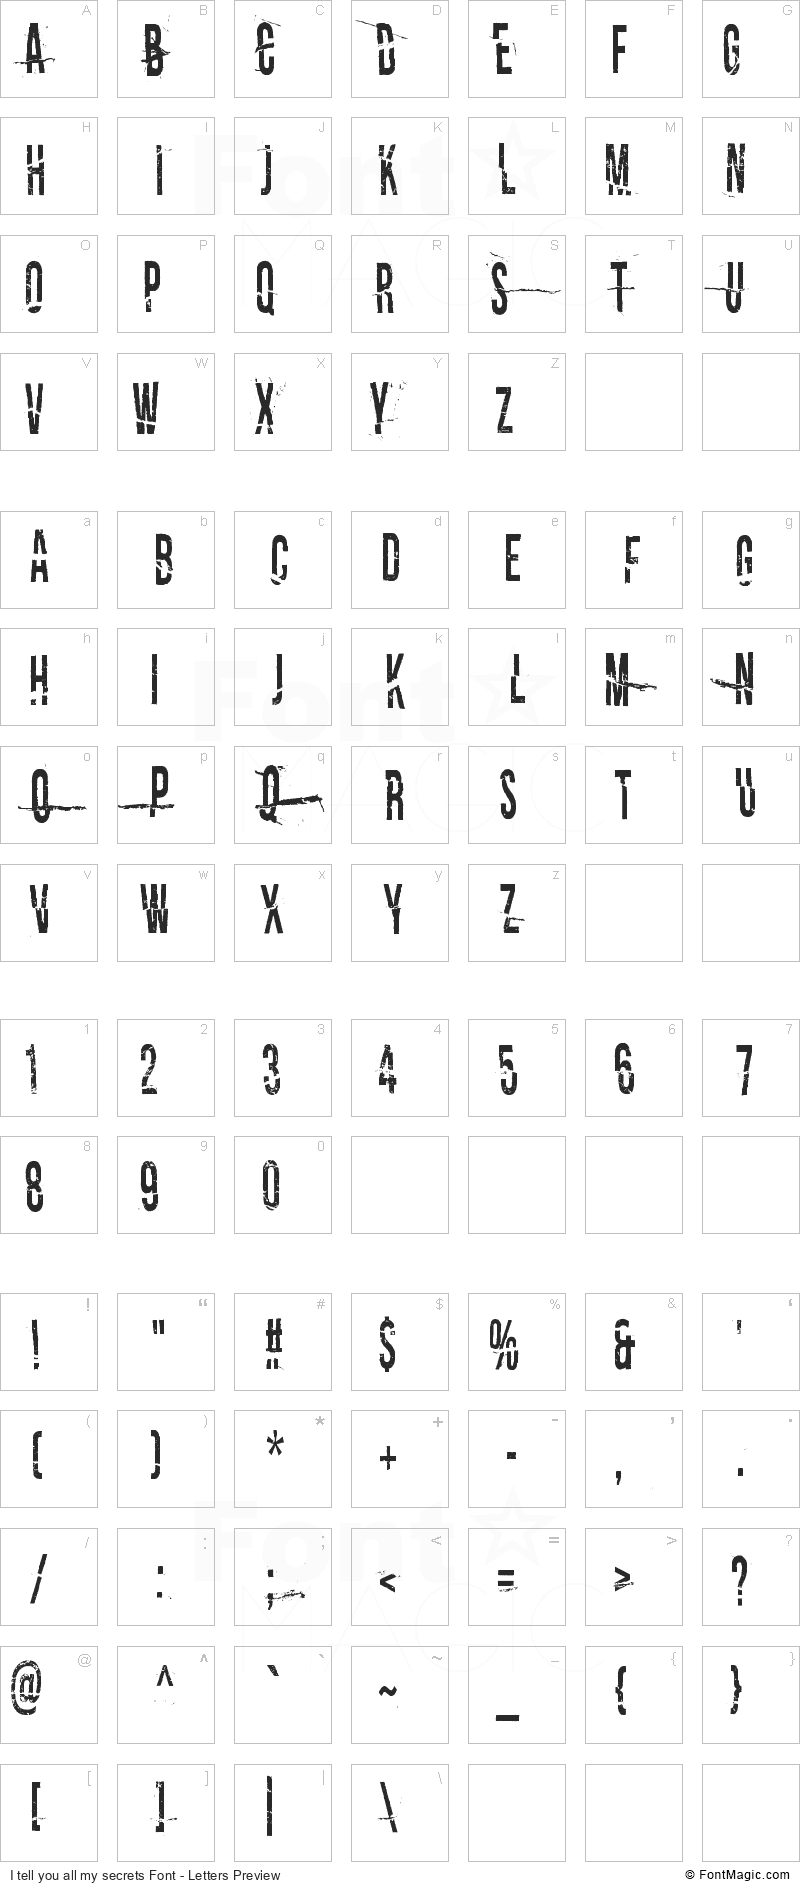 I tell you all my secrets Font - All Latters Preview Chart